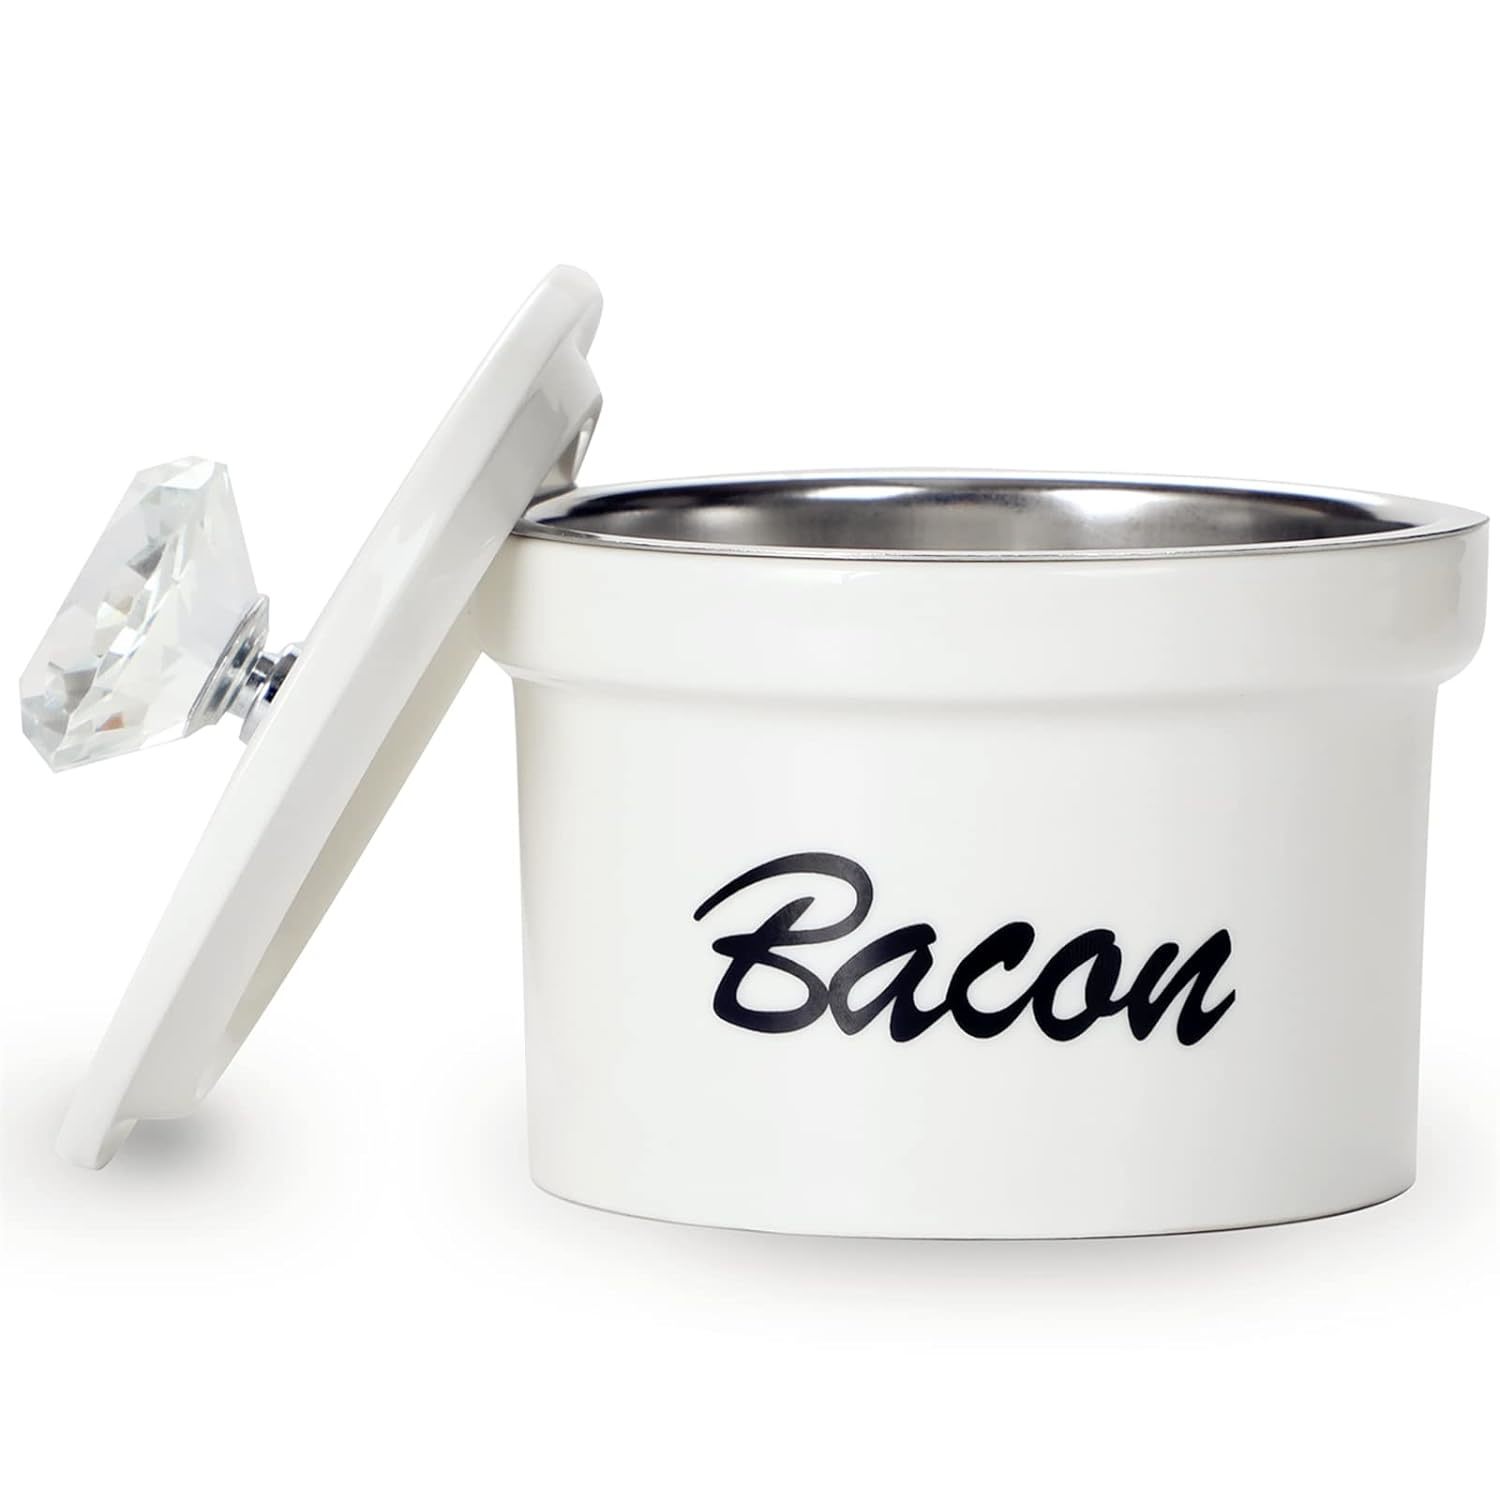 Primary image for Bacon Grease Container Keeper With Crystal Lid And Strainer, 12 Oz Ceramic Fryin